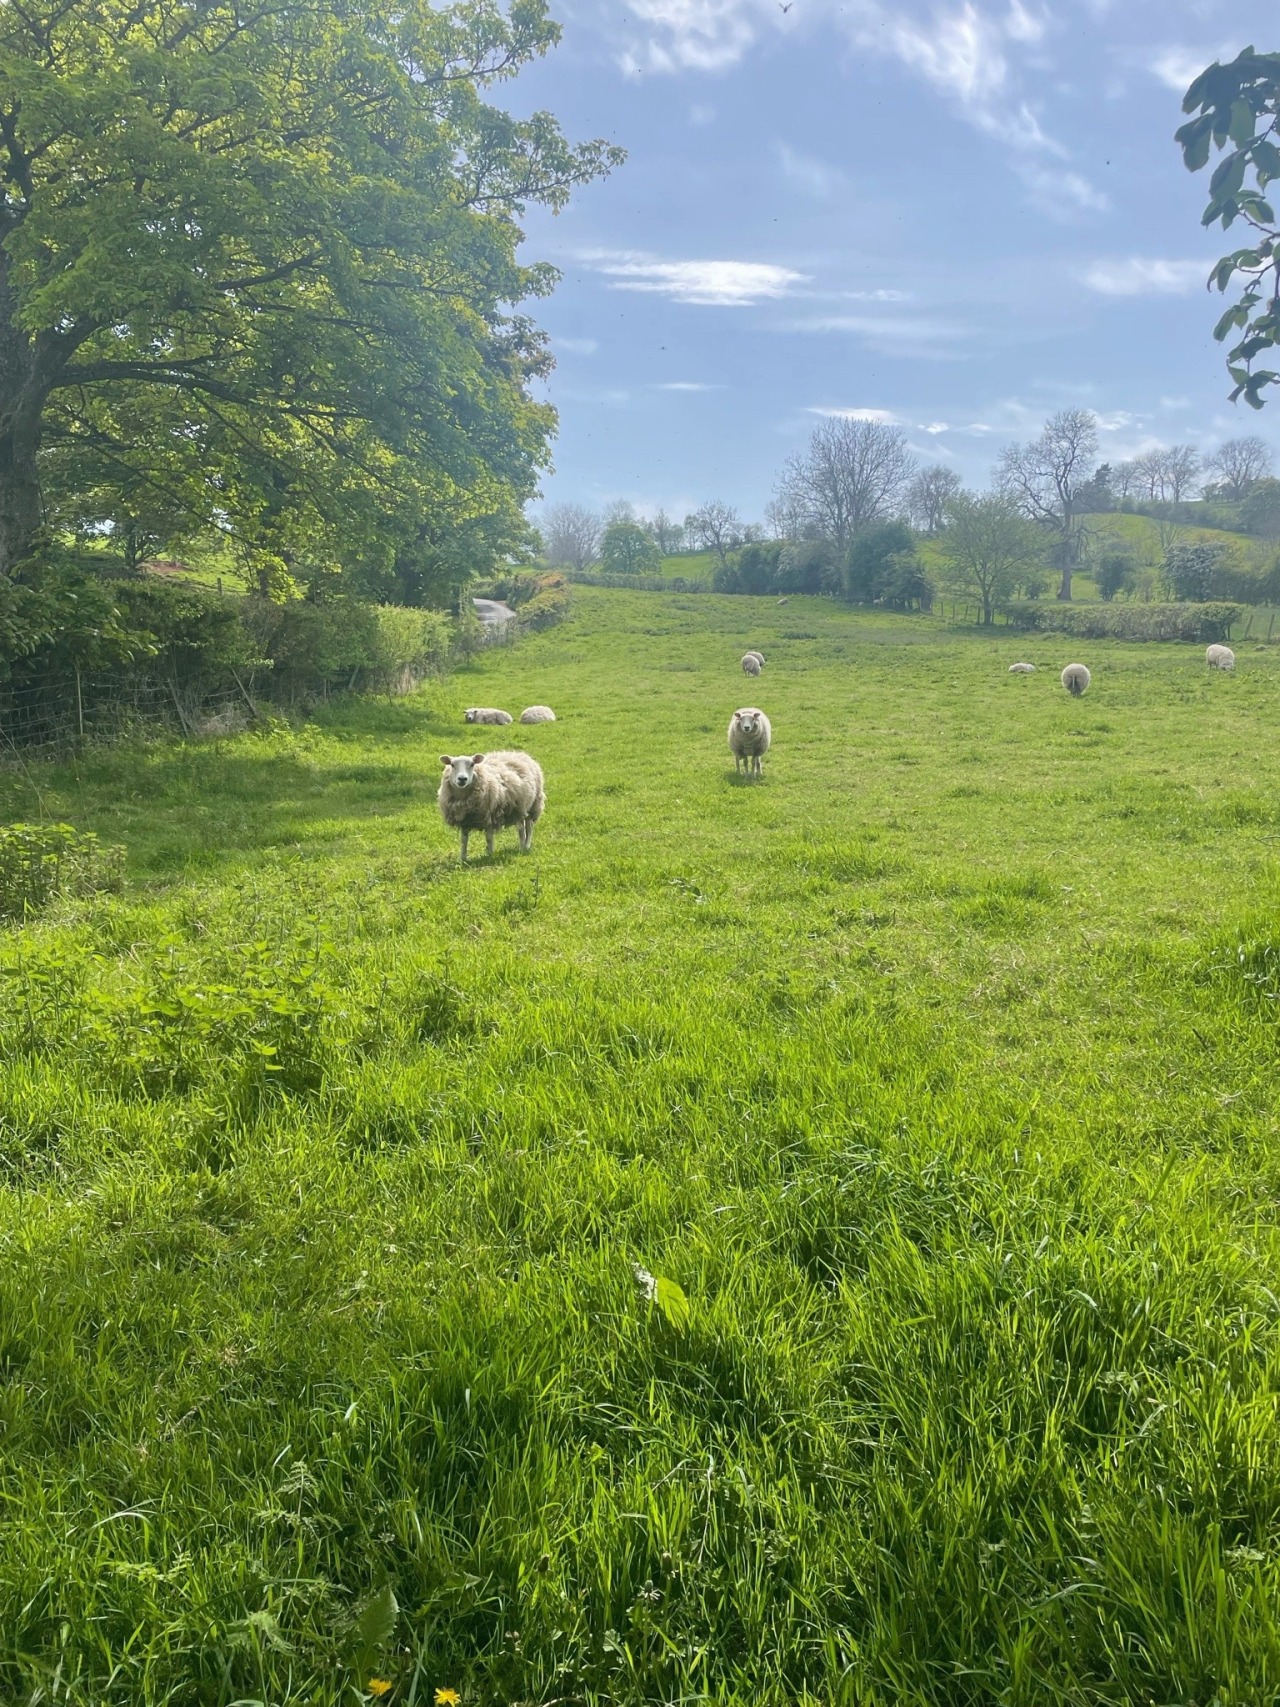 Went for a walk this weekend but it was too sunny to stay out for a long time.. #cottagecore#cottage core#countryside#country core#english countryside#sheep#lambs#traditional femininity#nature#nature core#farmcore#warmcore